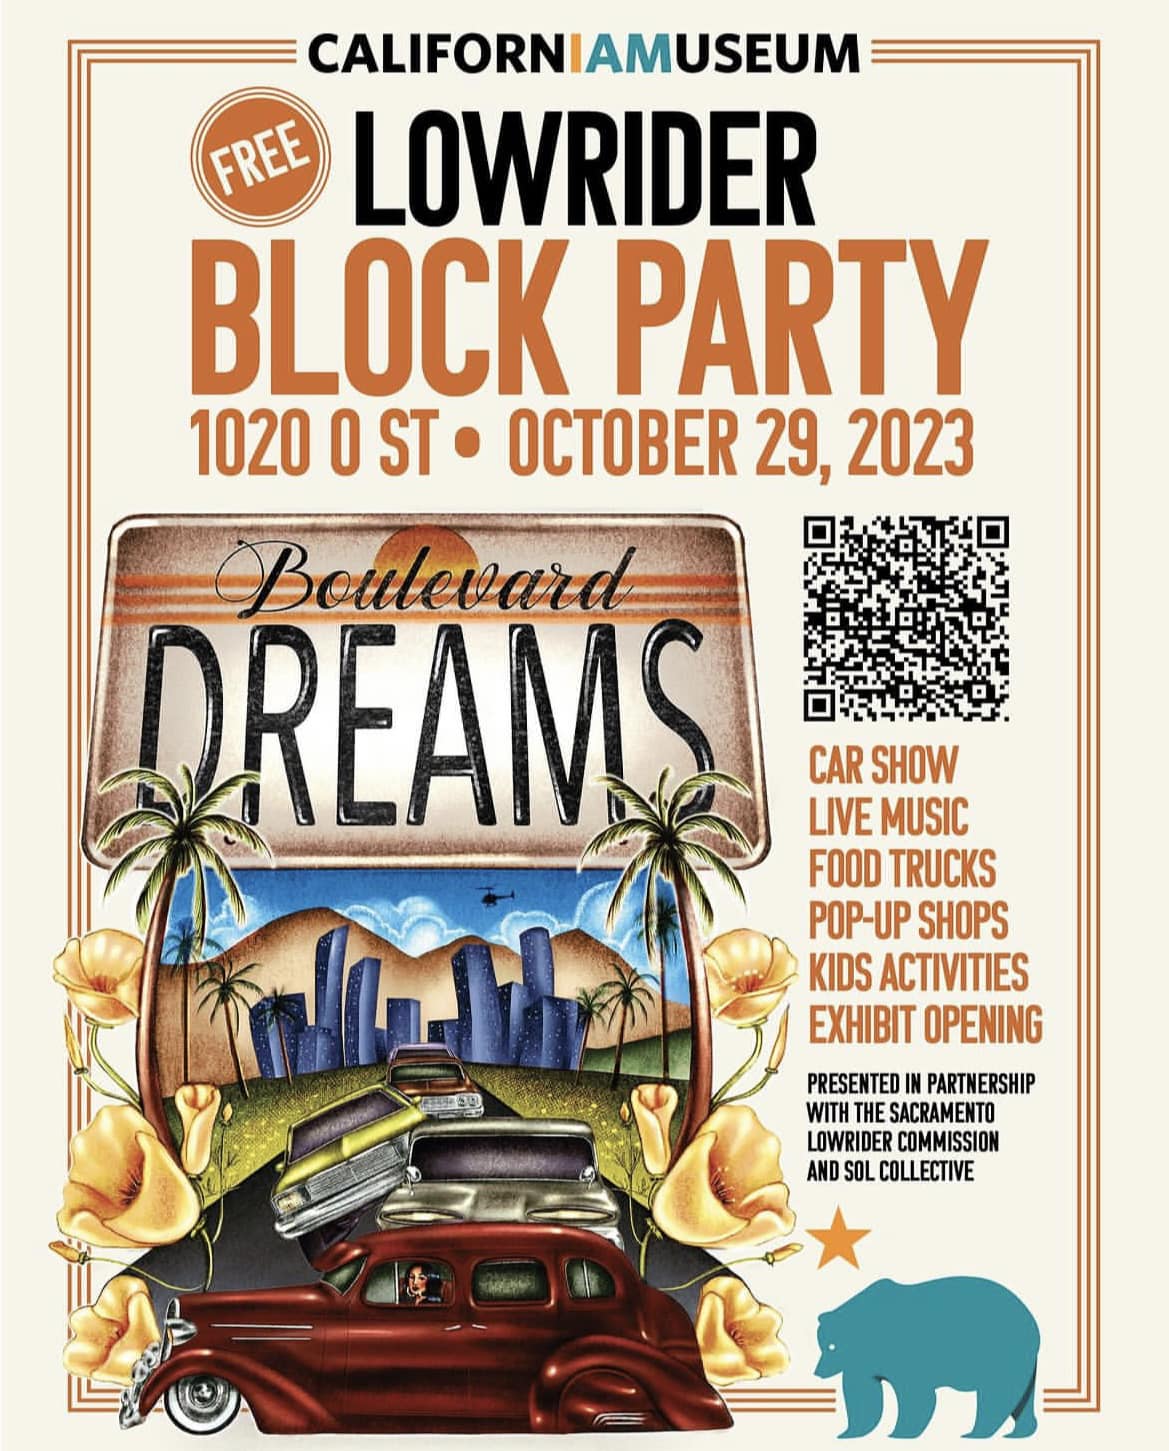 Lowrider Block Party